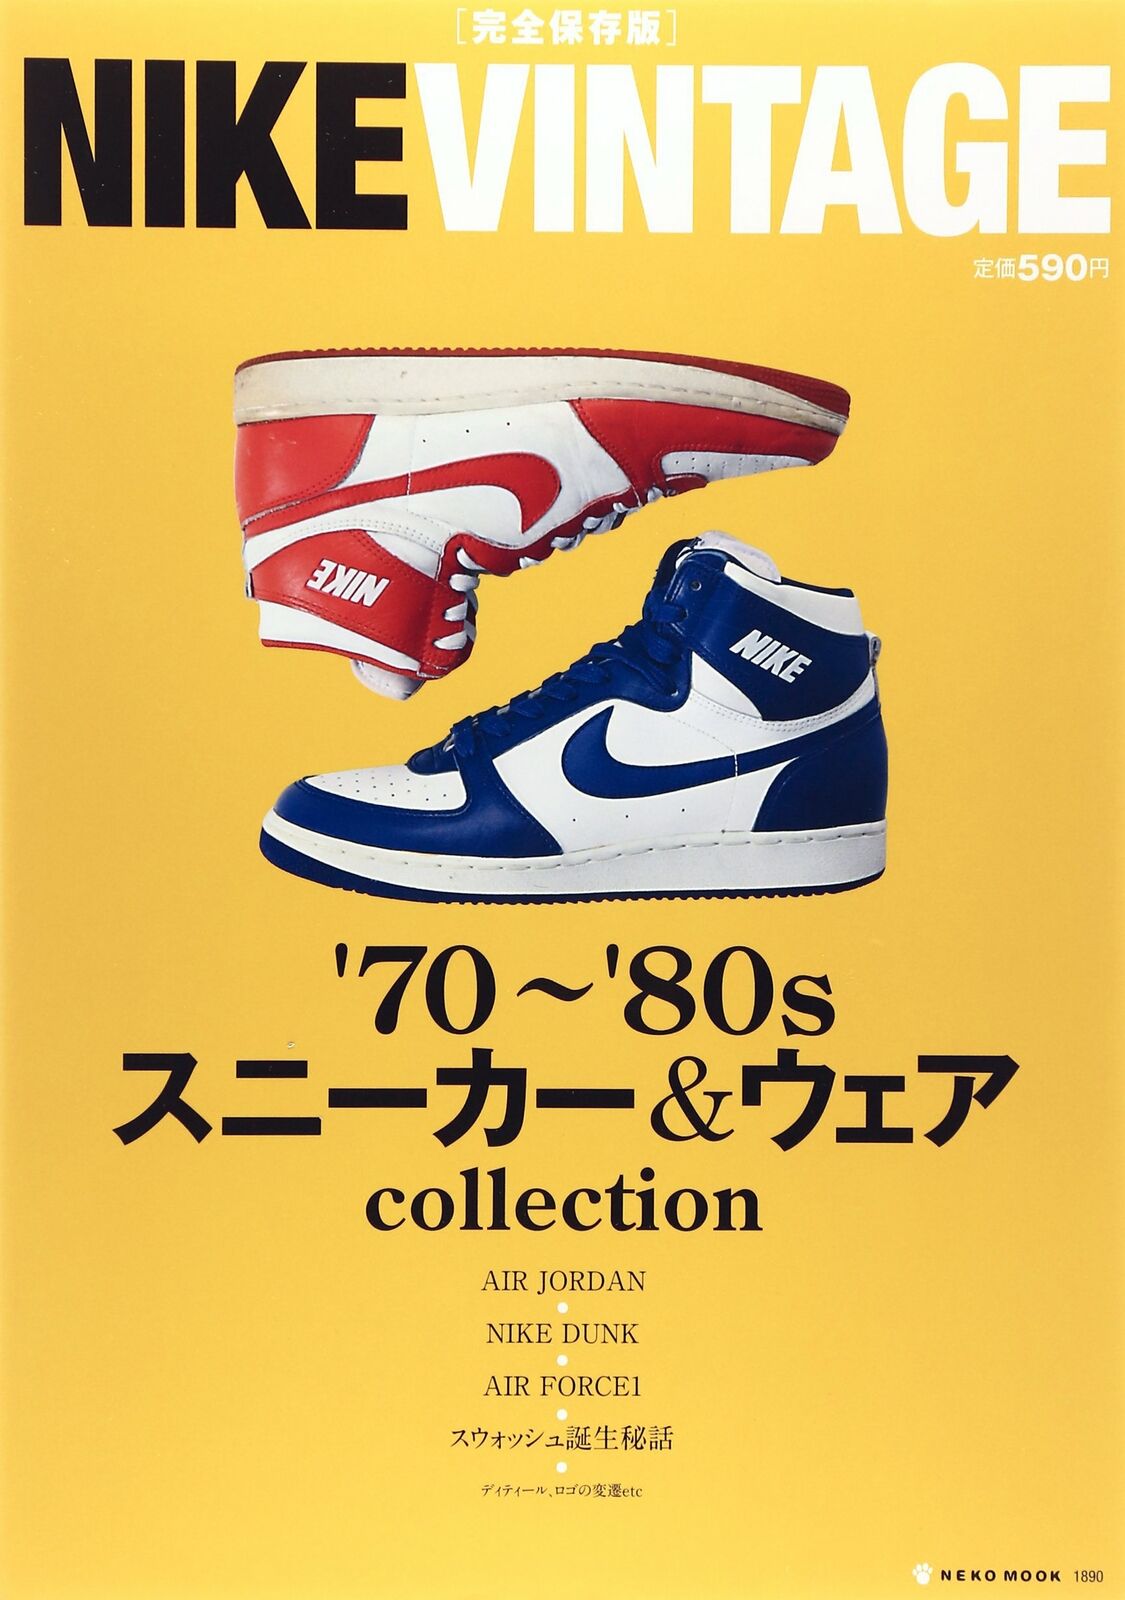 NIKE VINTAGE '70 - '80s Sneakers & Wear Collection Book